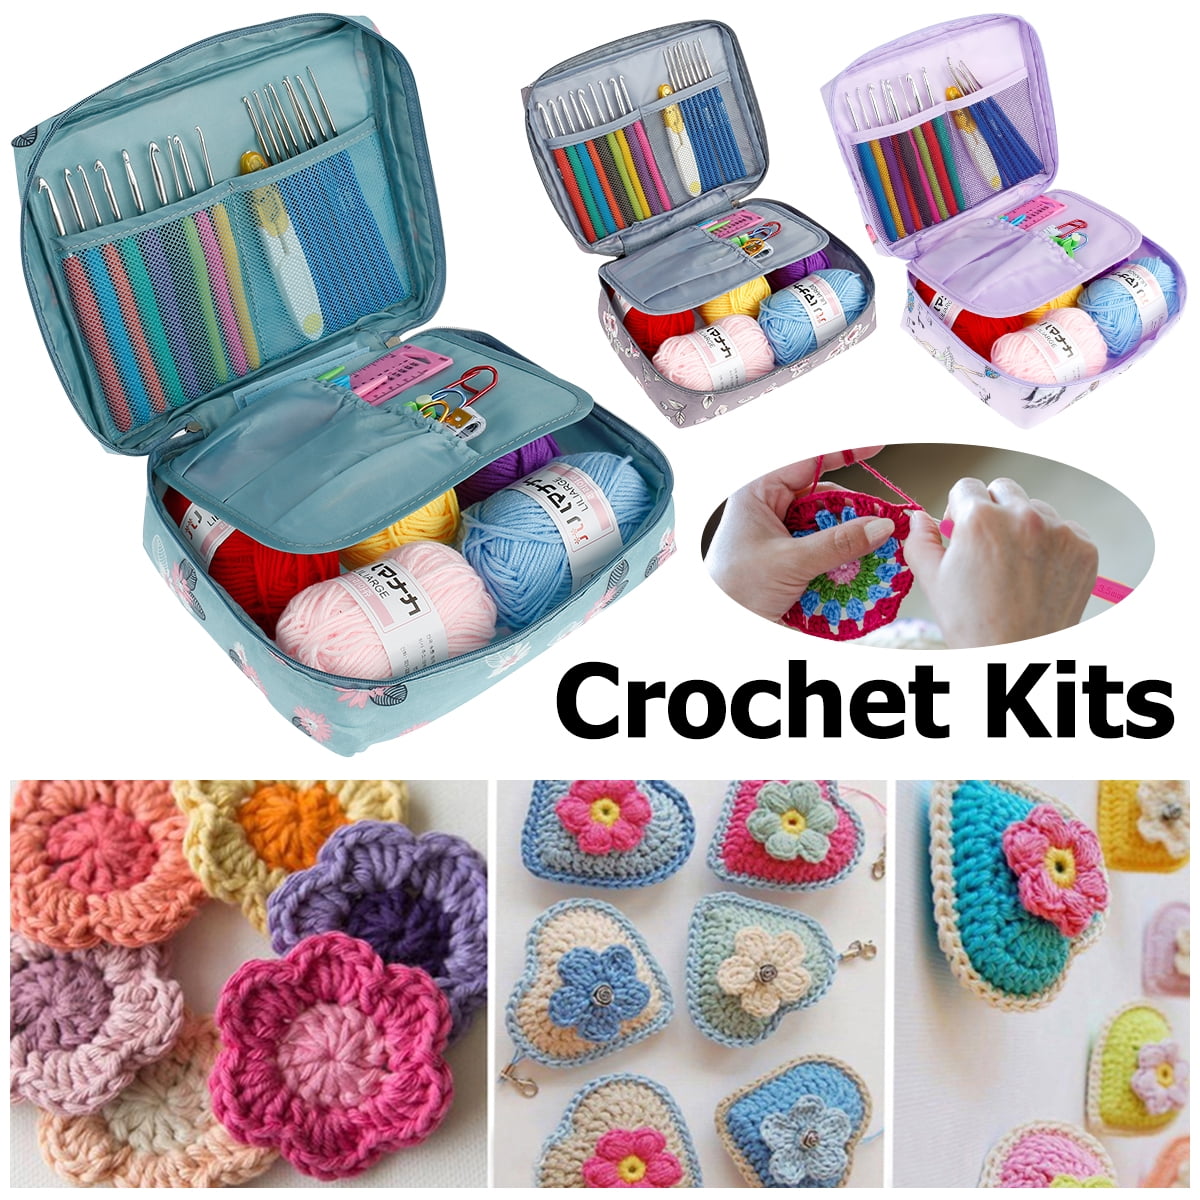 Kawaii Crochet Kit: Includes Everything You Need to Get Started Creating These Super Cute Creations!–Kit Includes: 48-page Instruction Book, Crochet Hook, Safety Eyes, 3 Colors of Yarn, Fiberfill Stuffing, Yarn Needle, Embroidery Floss [Book]